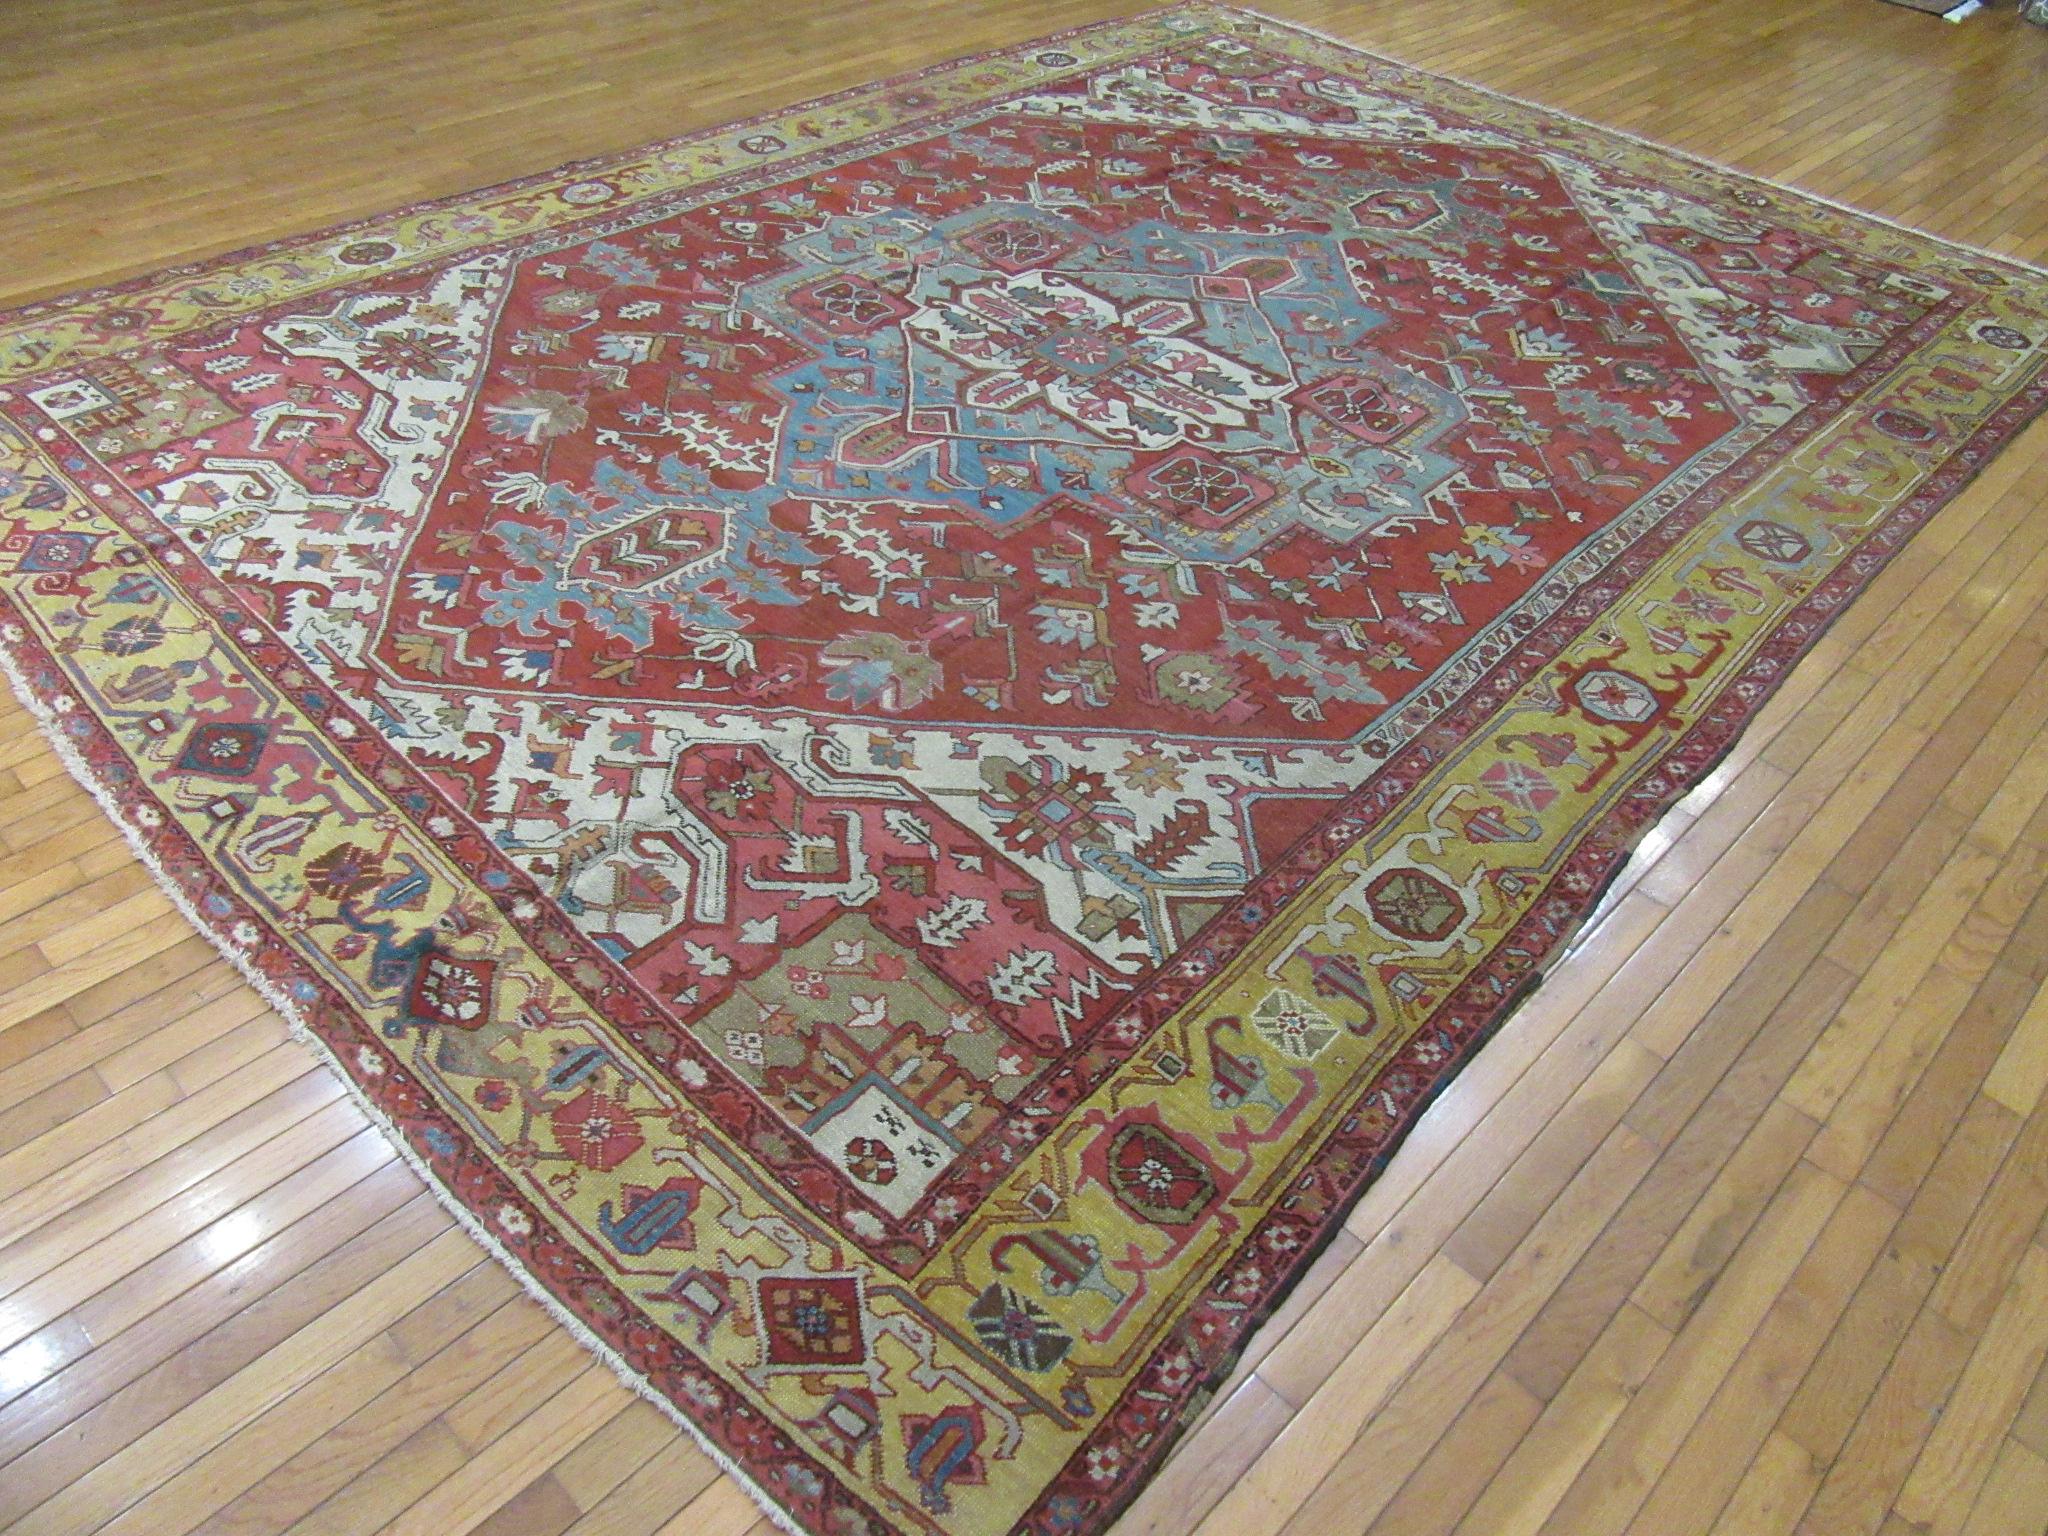 Large Room Size Antique Hand Knotted wool Red Teal and Gold Persian Serapi Rug For Sale 7